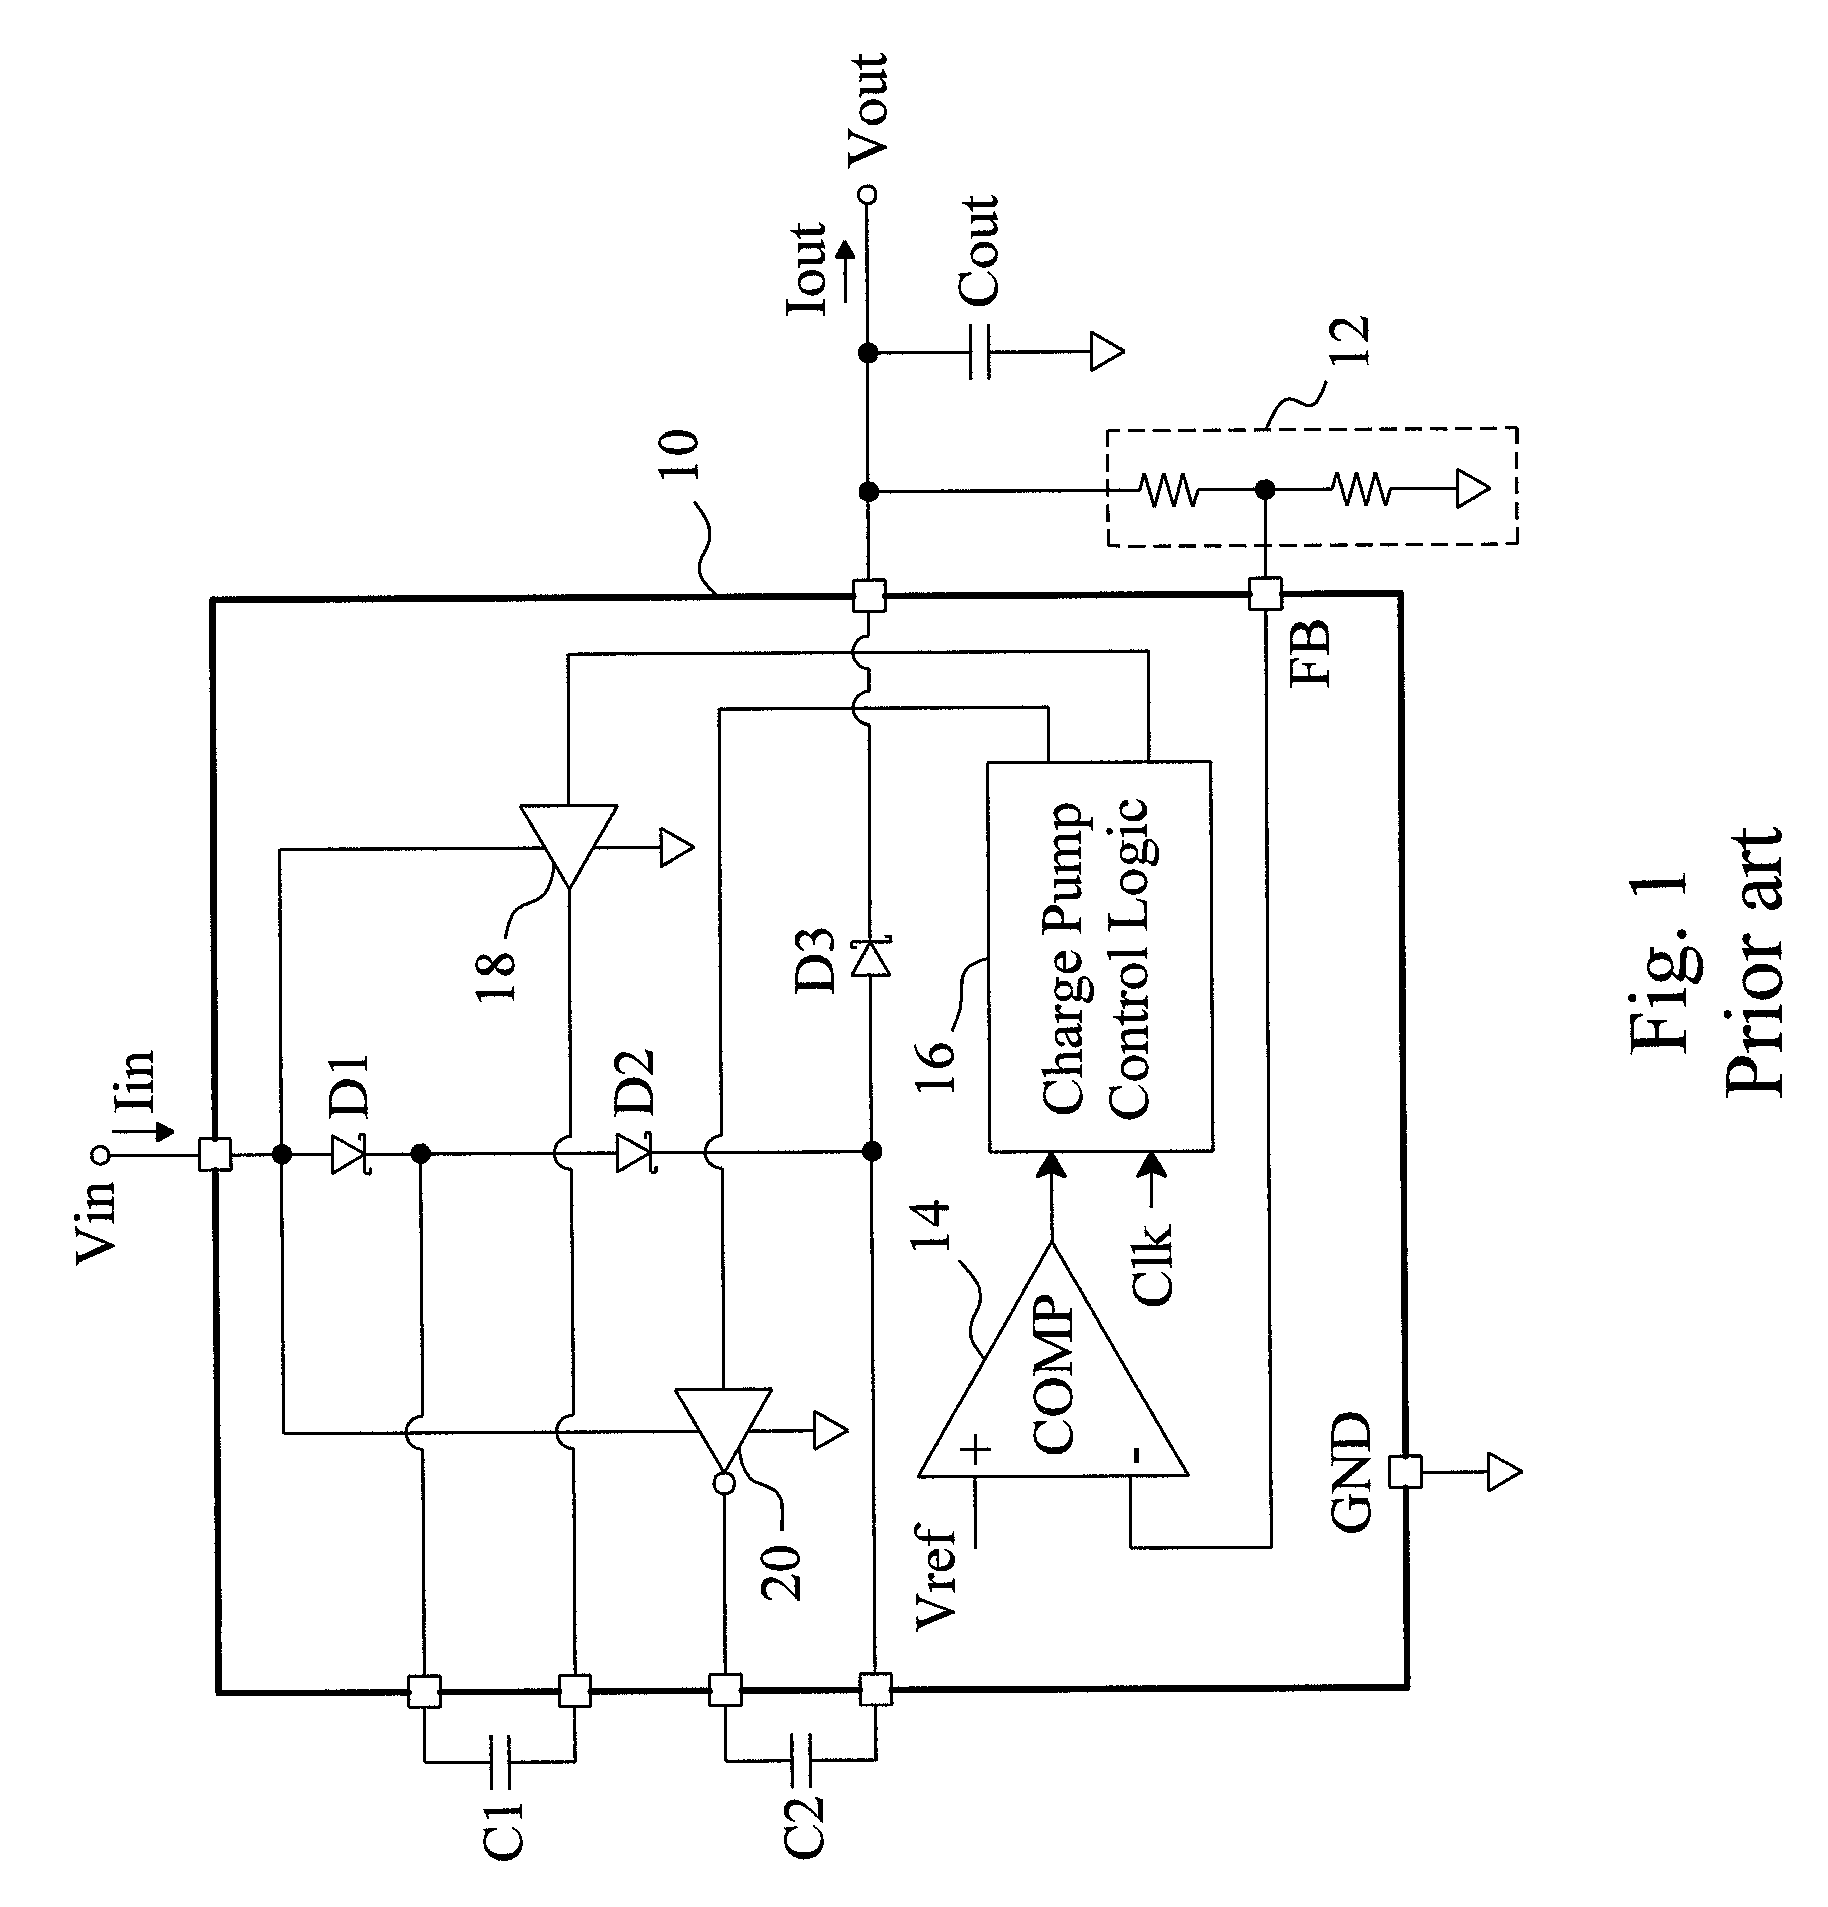 Efficiency and thermal improvement of a charge pump by mixing different input voltages